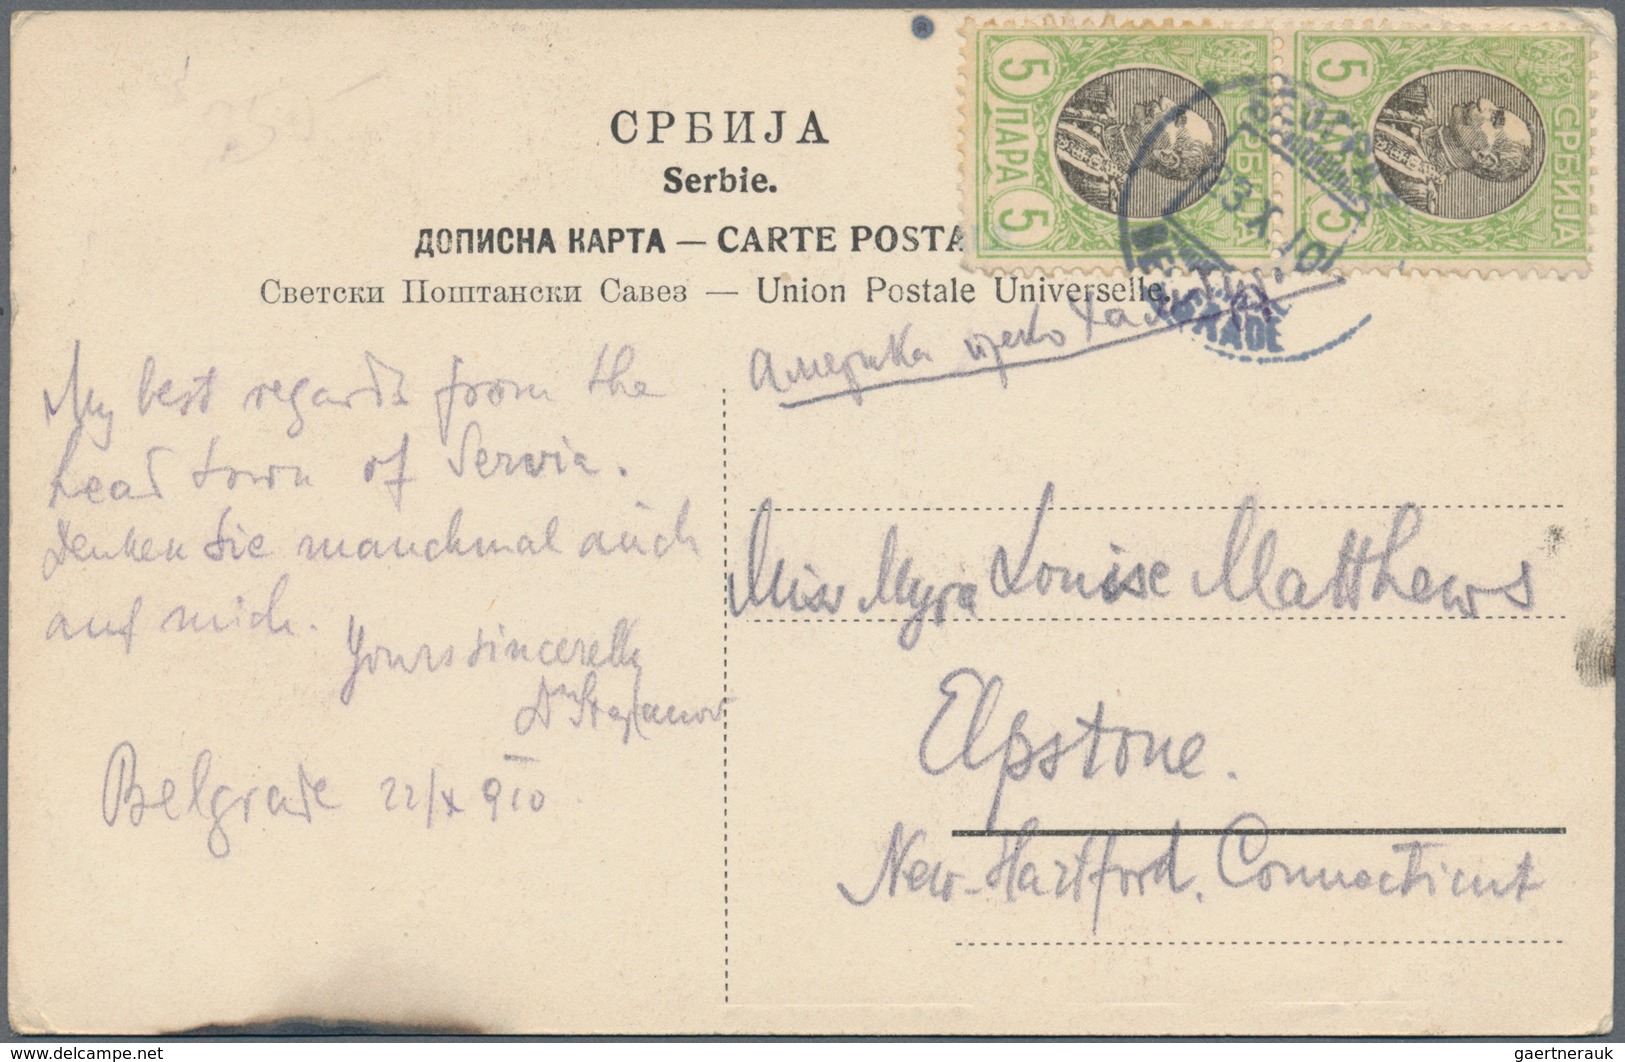 Europa - Ost: 1890/1960 (ca.), comprehensive holding of covers/cards, comprising Bulgaria, Romania,